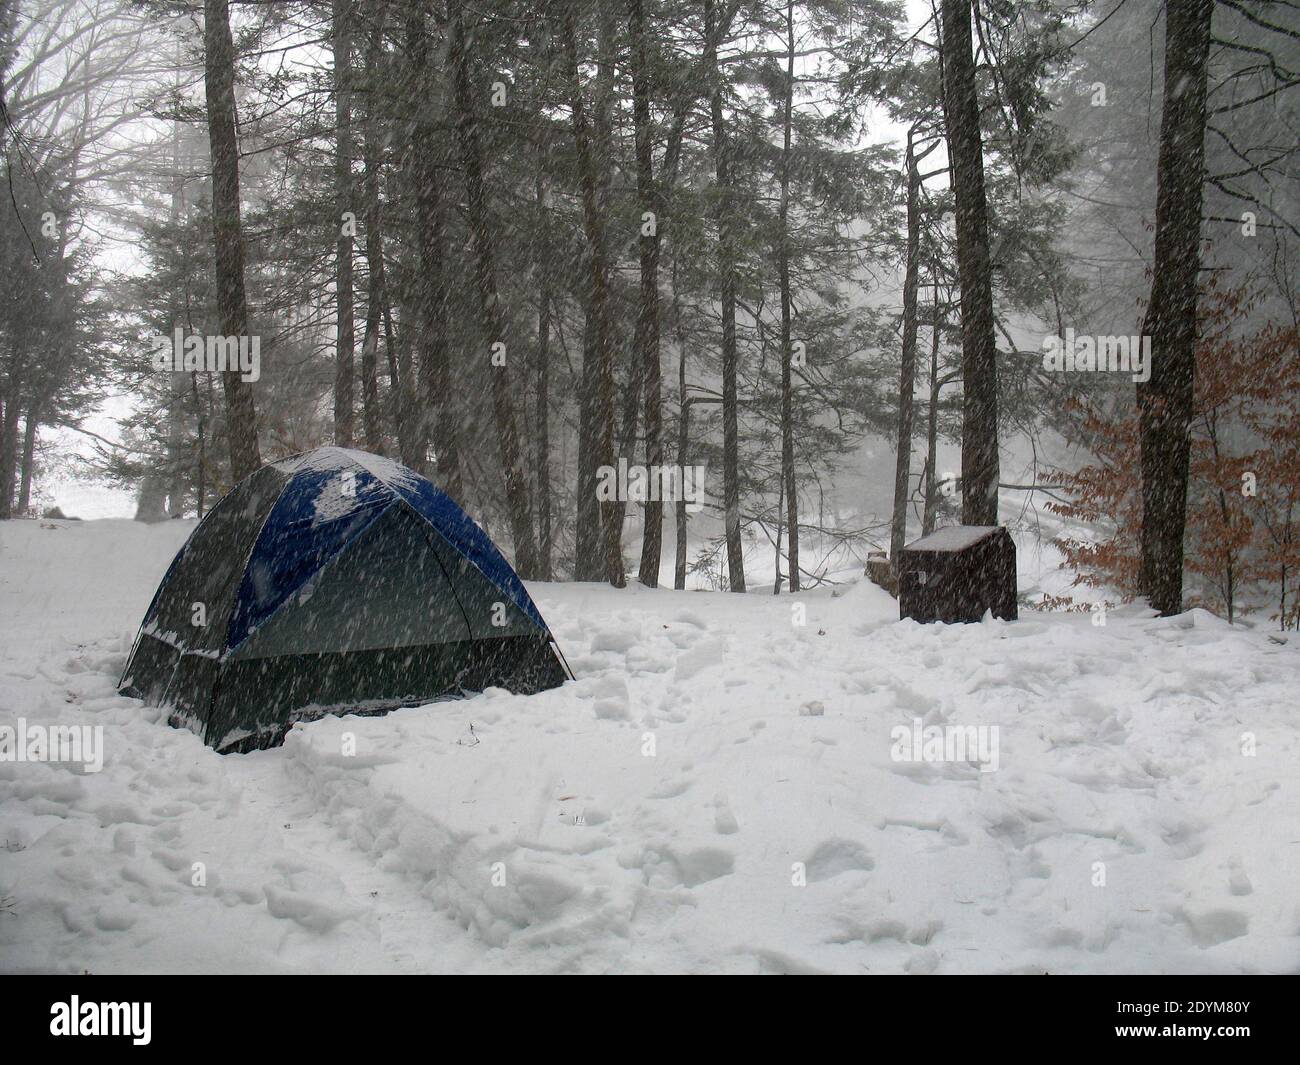 Tent Camping in Winter Woods During Snowstorm, Lake Ocquittunk, NJ Stock Photo